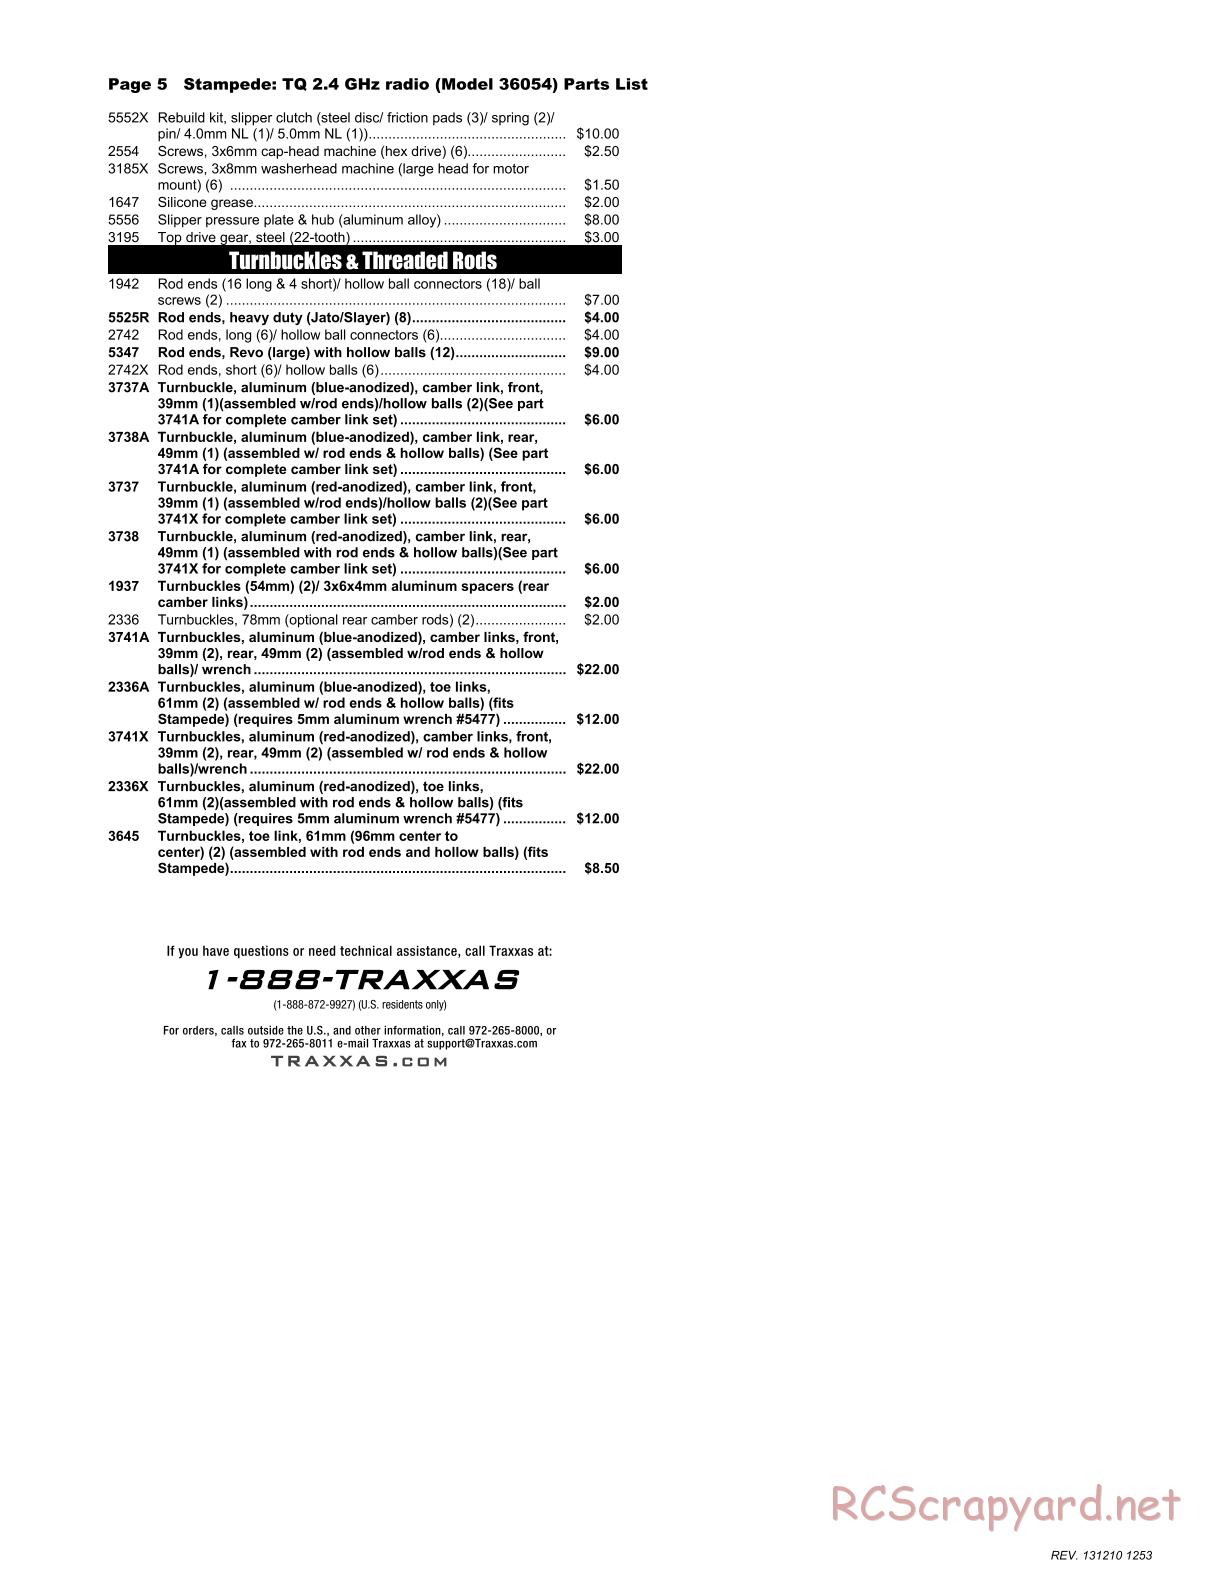 Traxxas - Stampede XL-5 - Parts List - Page 5